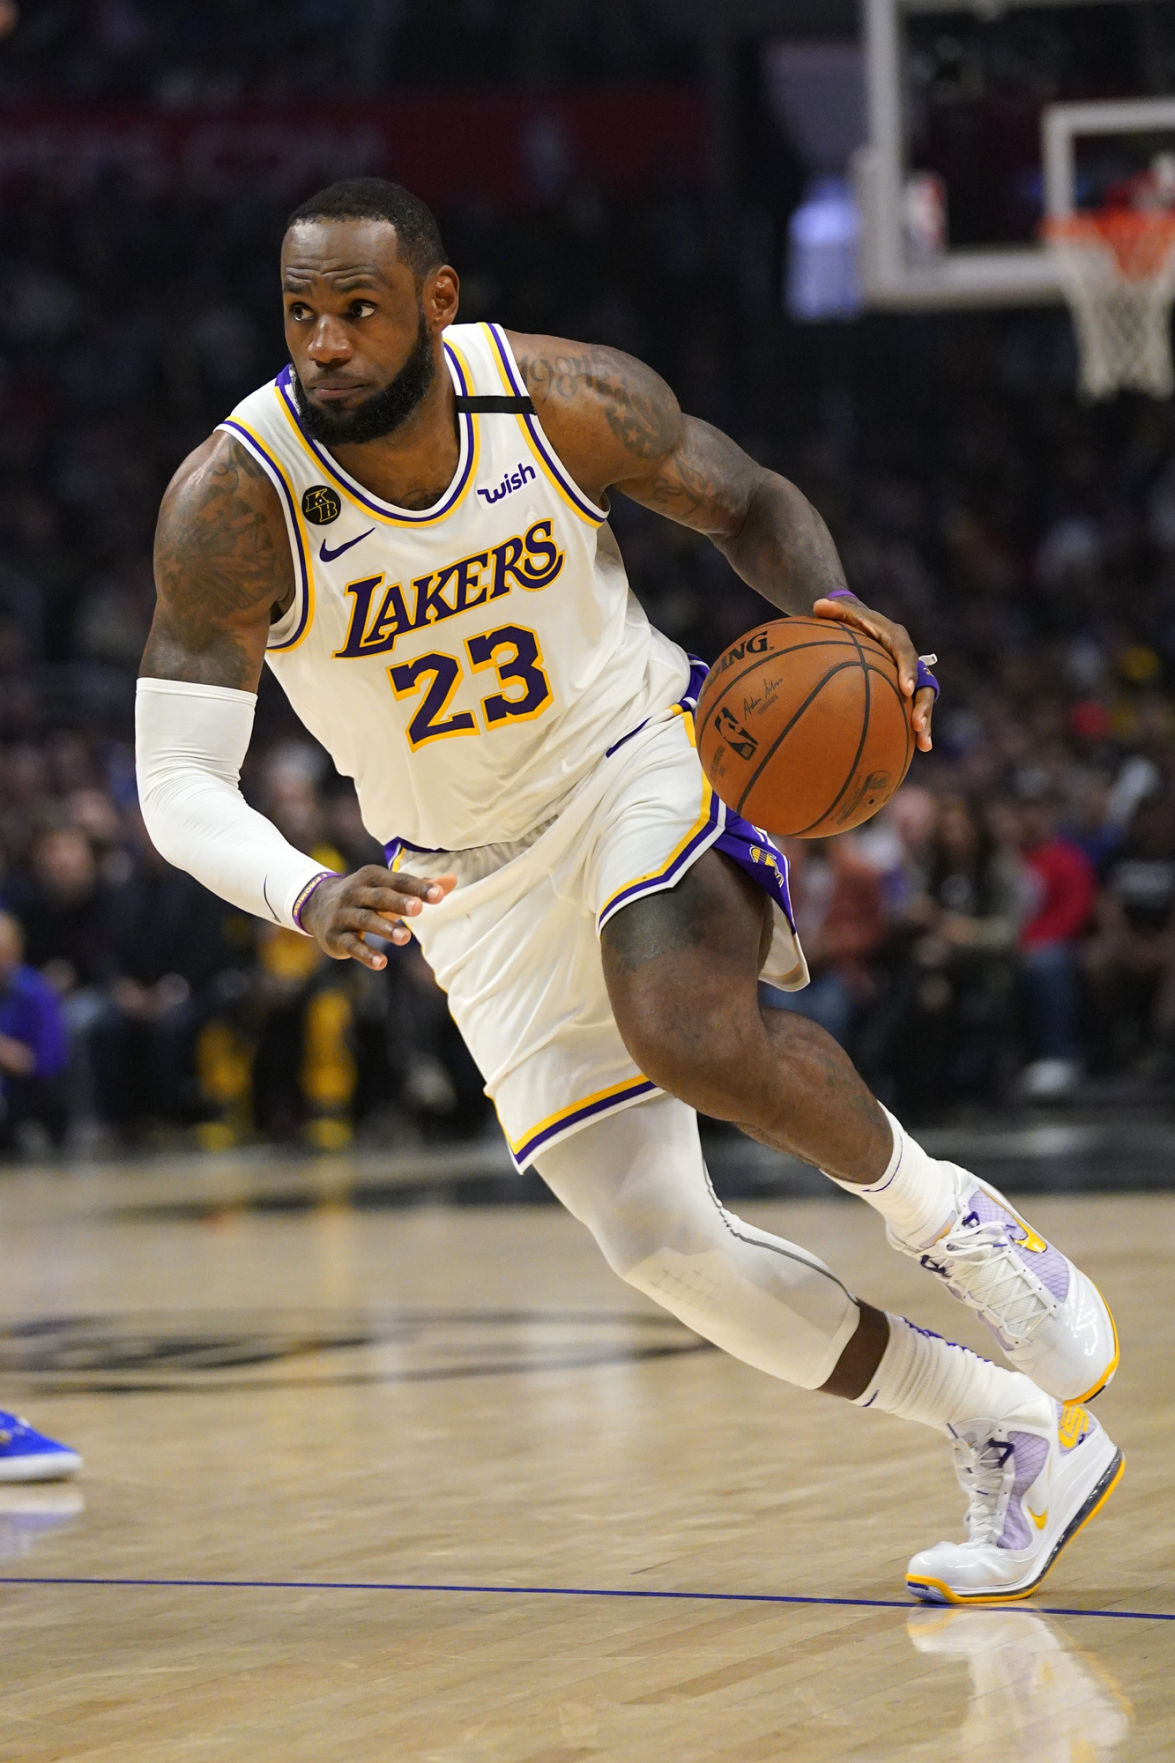 lebron-james-recruits-10000-poll-volunteers-to-help-in-black-districts